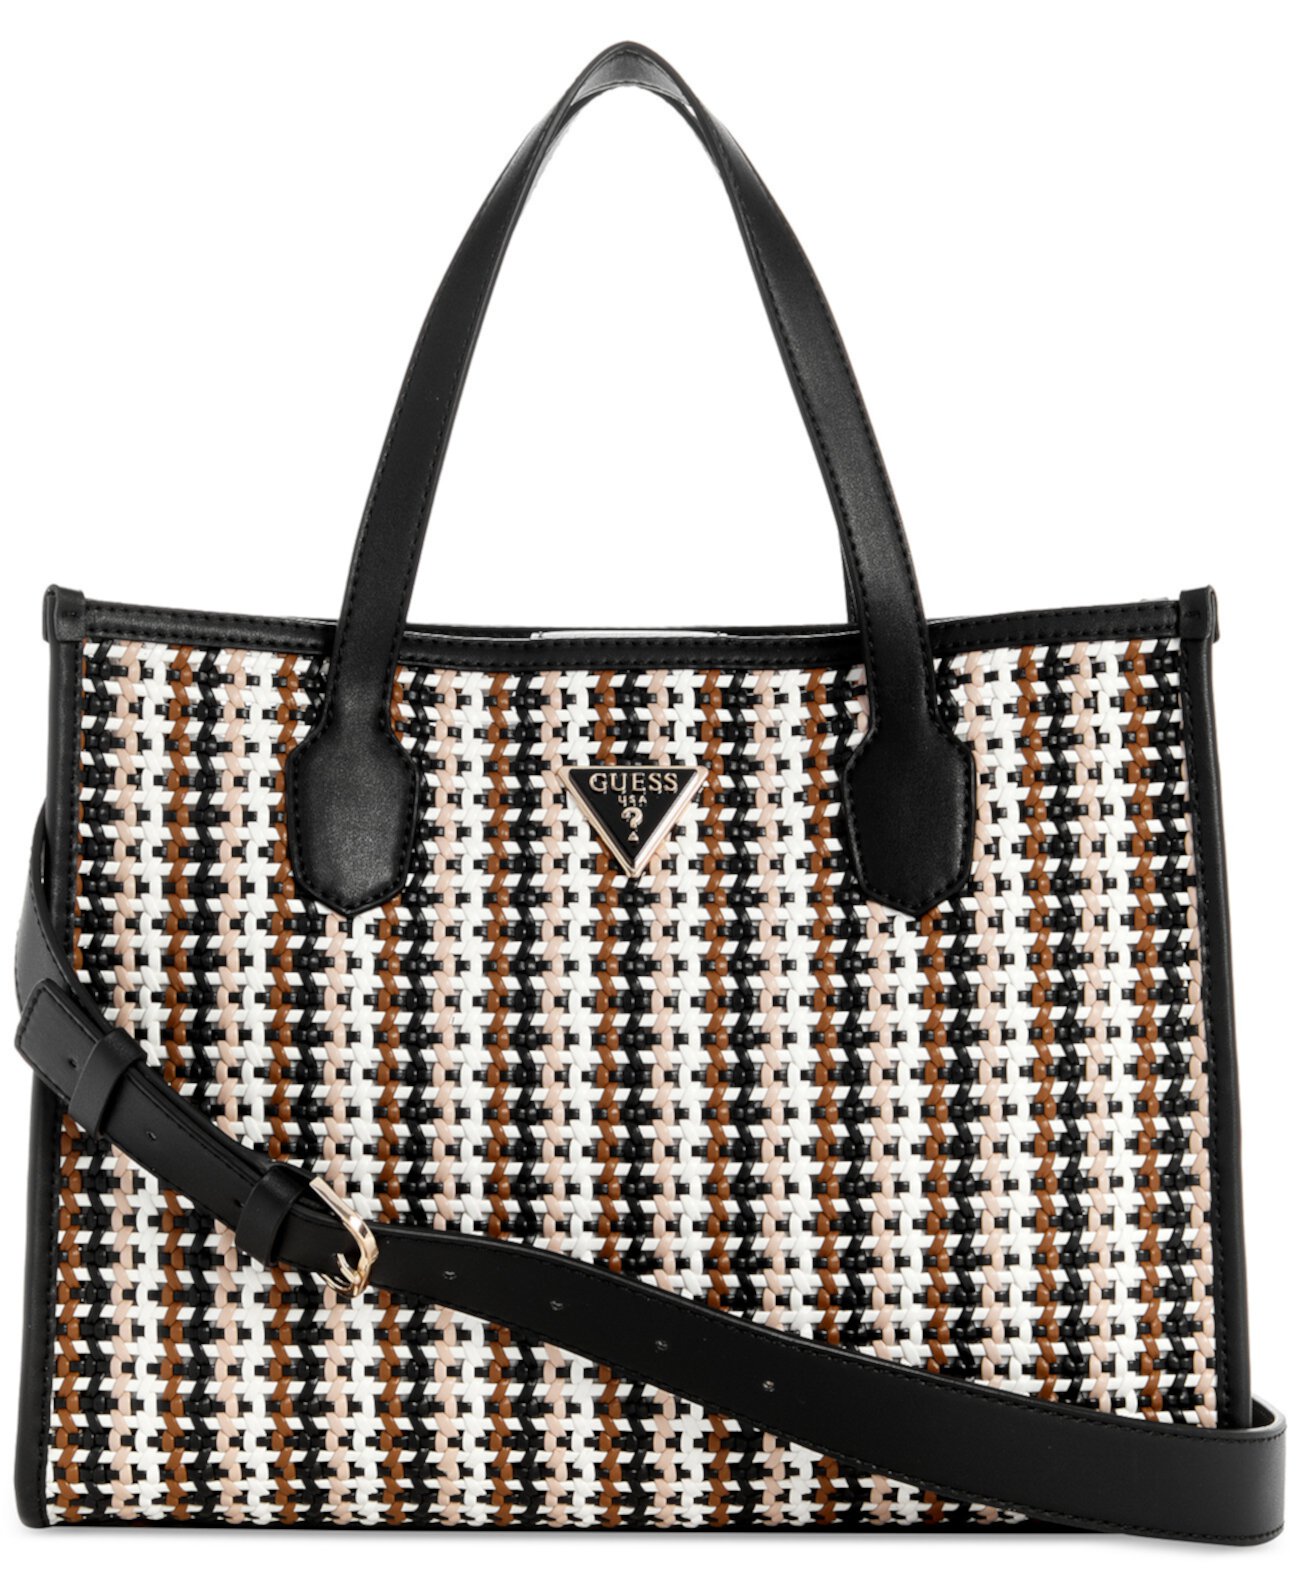 Silvana 2 Compartment Tote GUESS